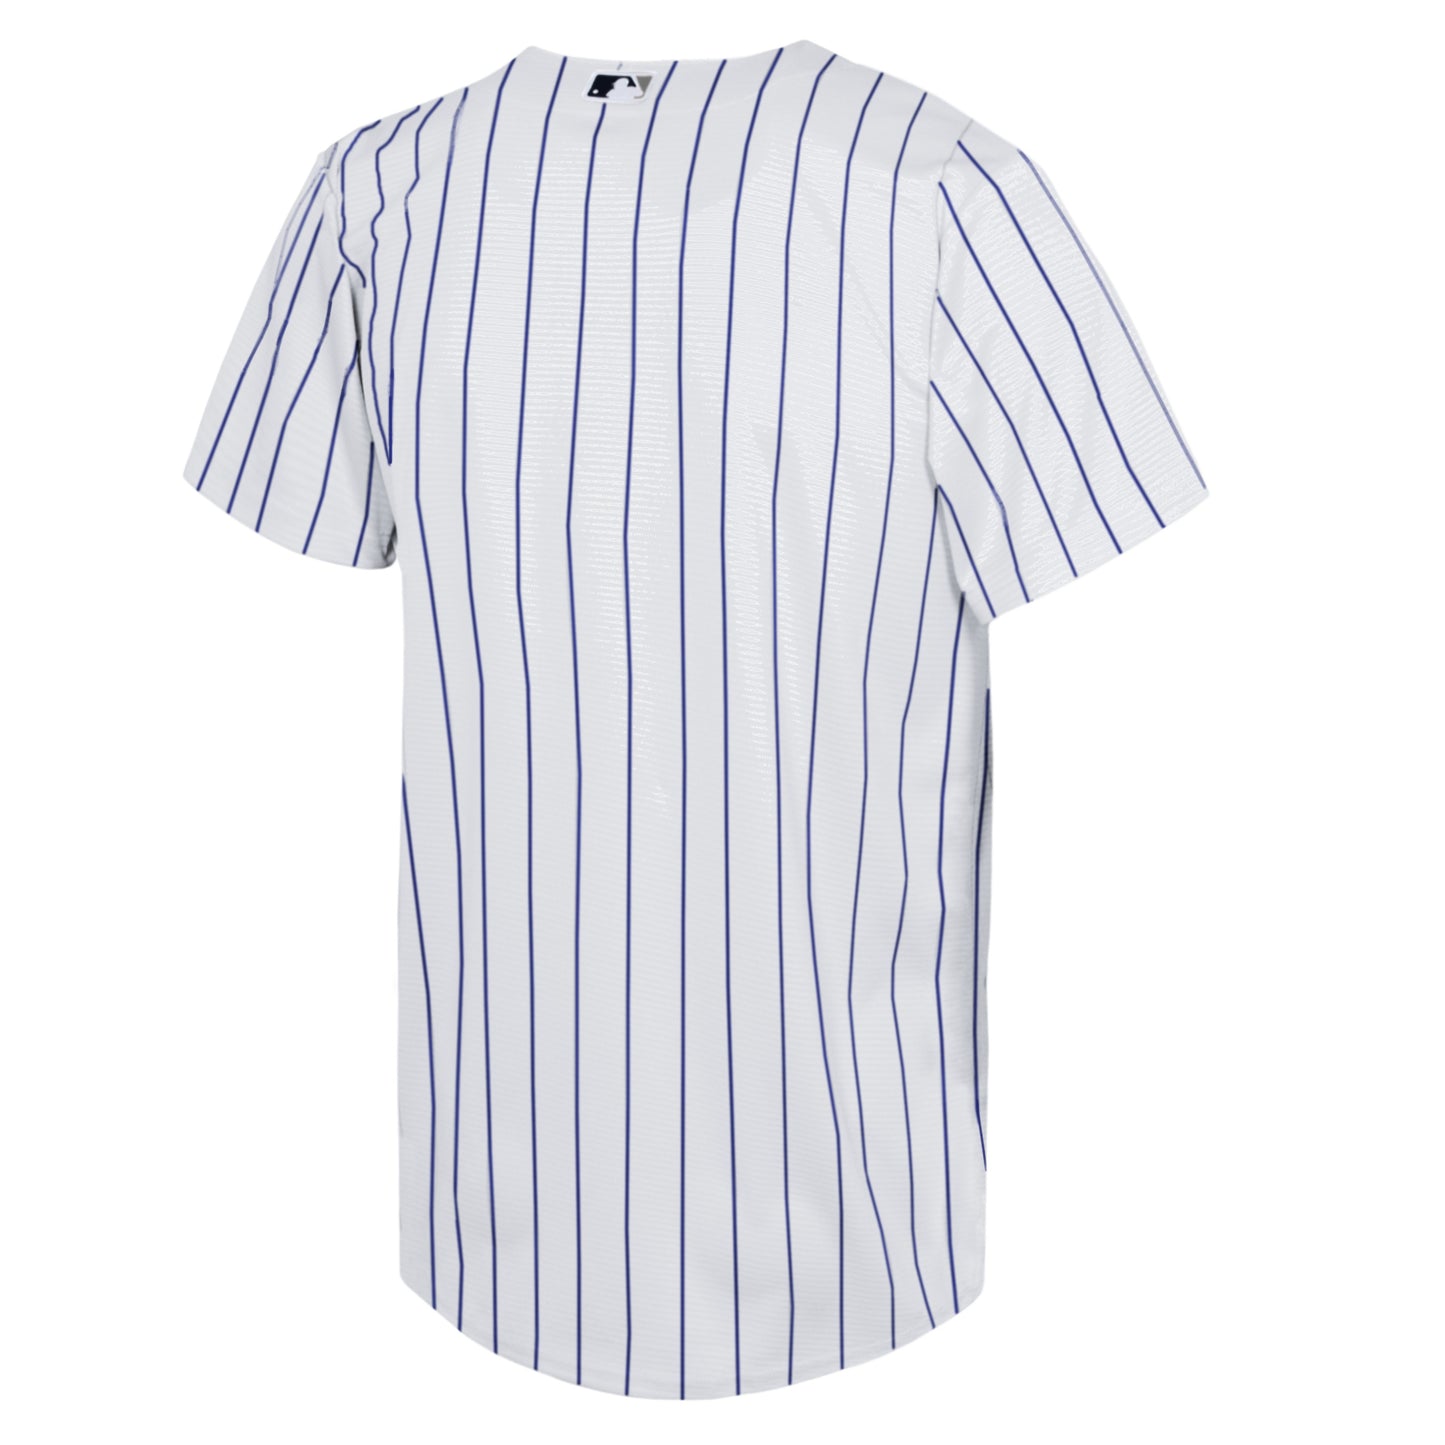 Youth New York Yankees White Home Game Blank Nike Replica Jersey